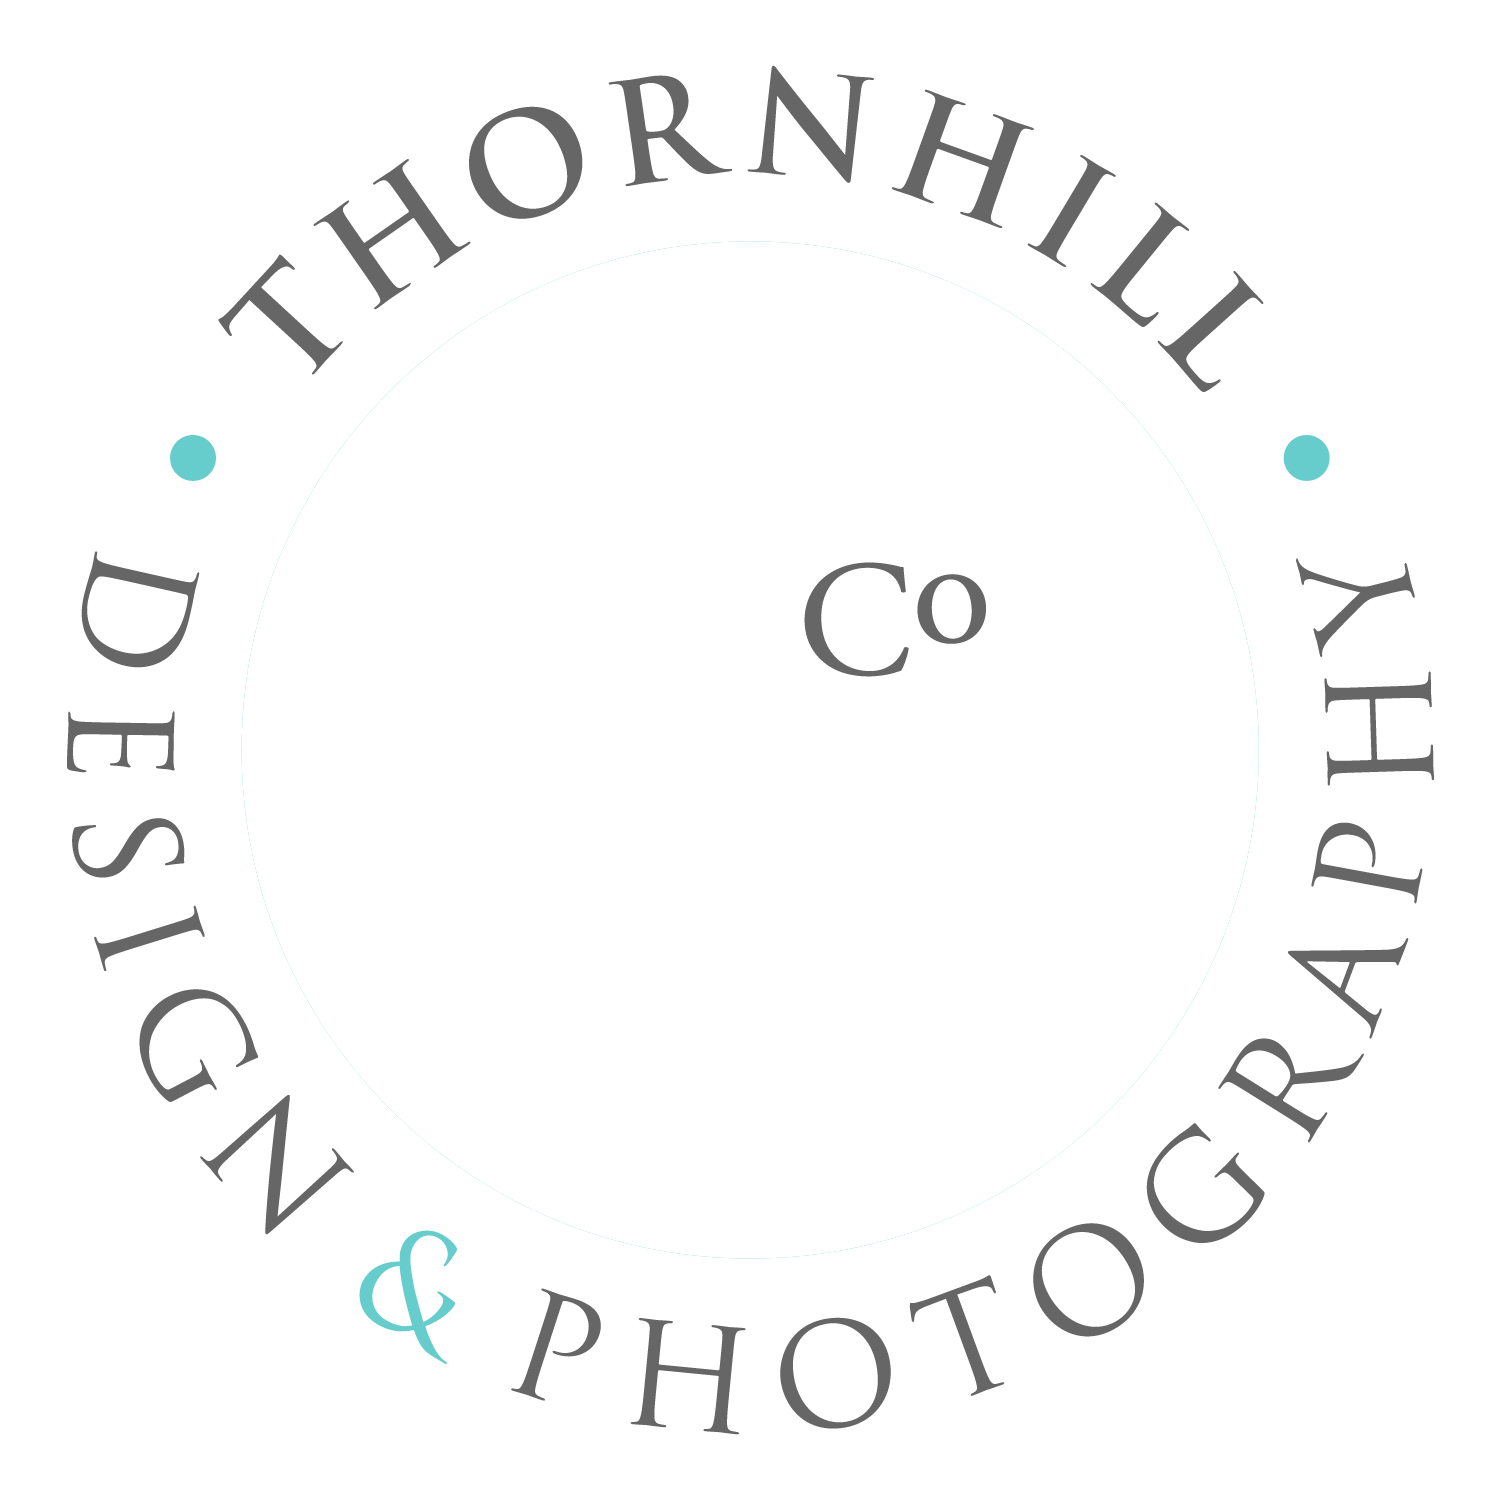 the thornhill and company graphic design and photography logo is on a turquoise background